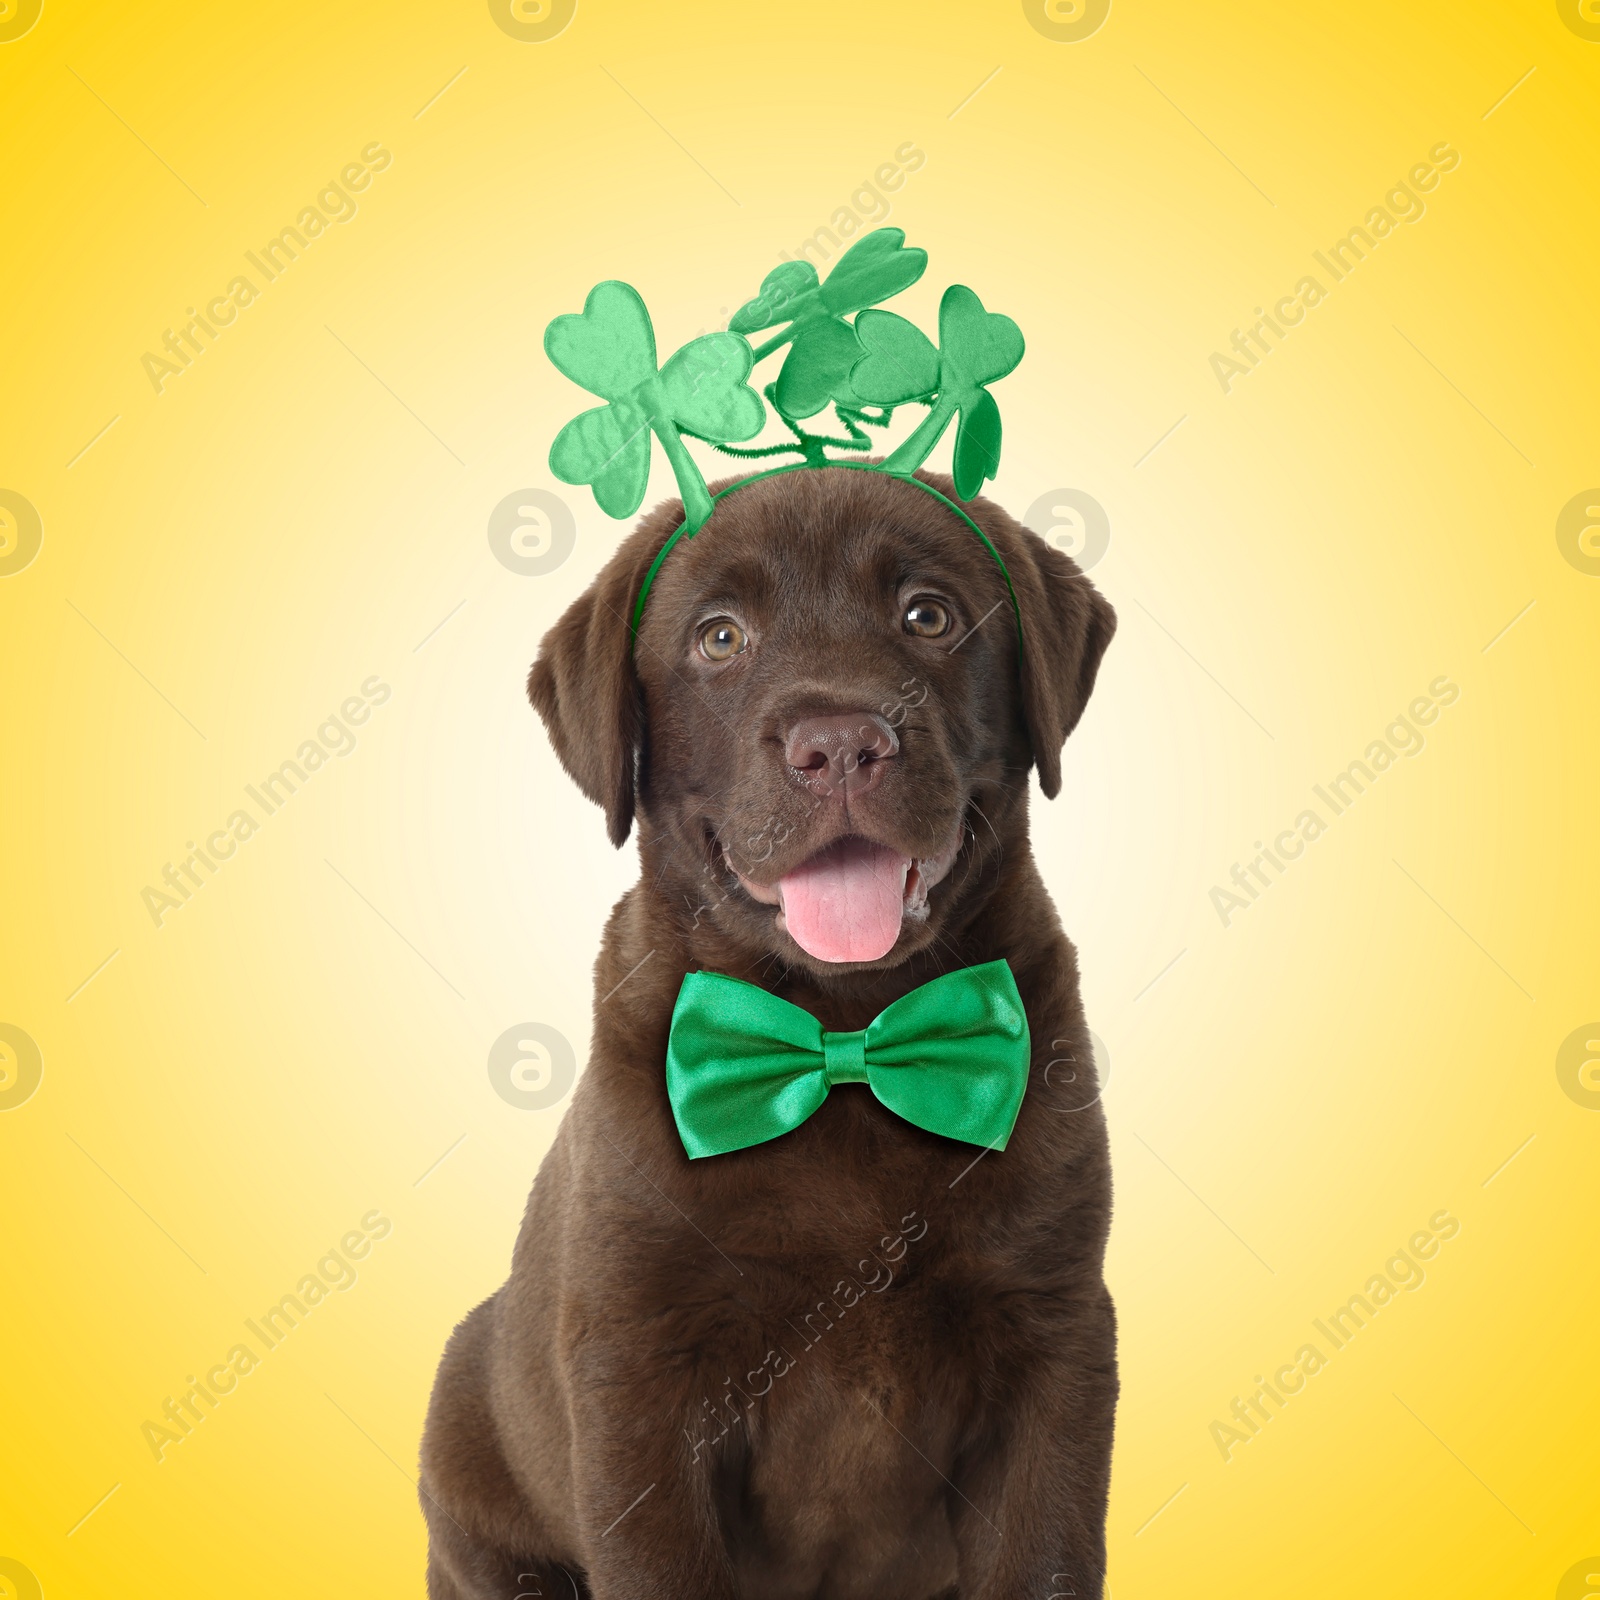 Image of St. Patrick's day celebration. Cute Chocolate Labrador puppy wearing headband with clover leaves and green bow tie on yellow background